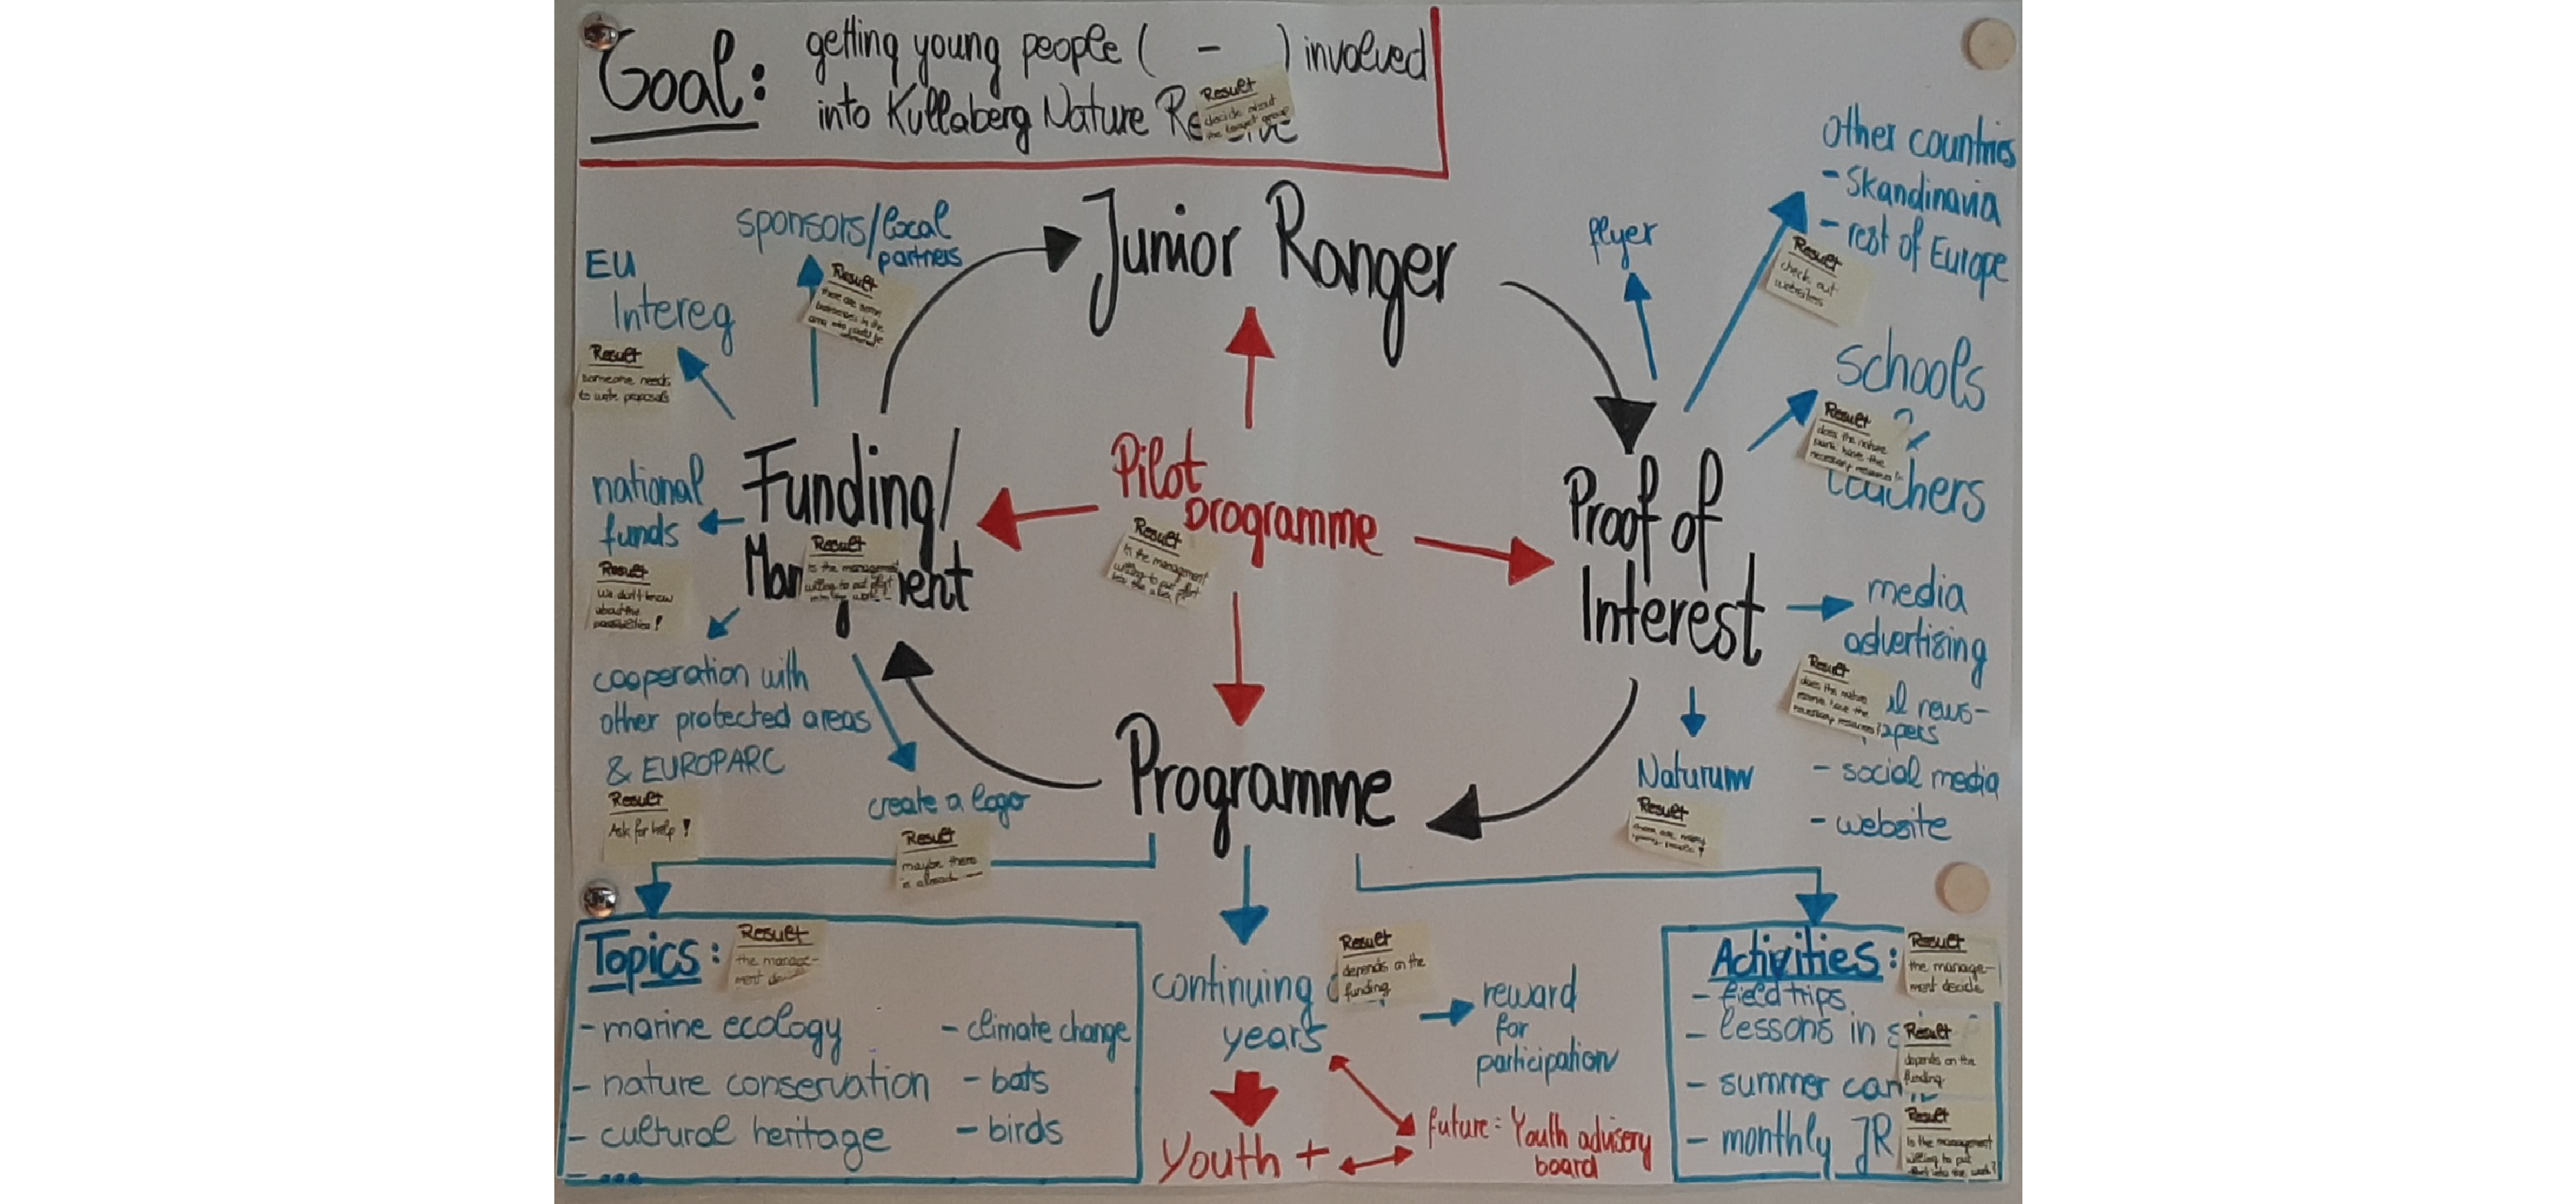 A diagram of the youth involvement process at Kullaberg Nature Reserve